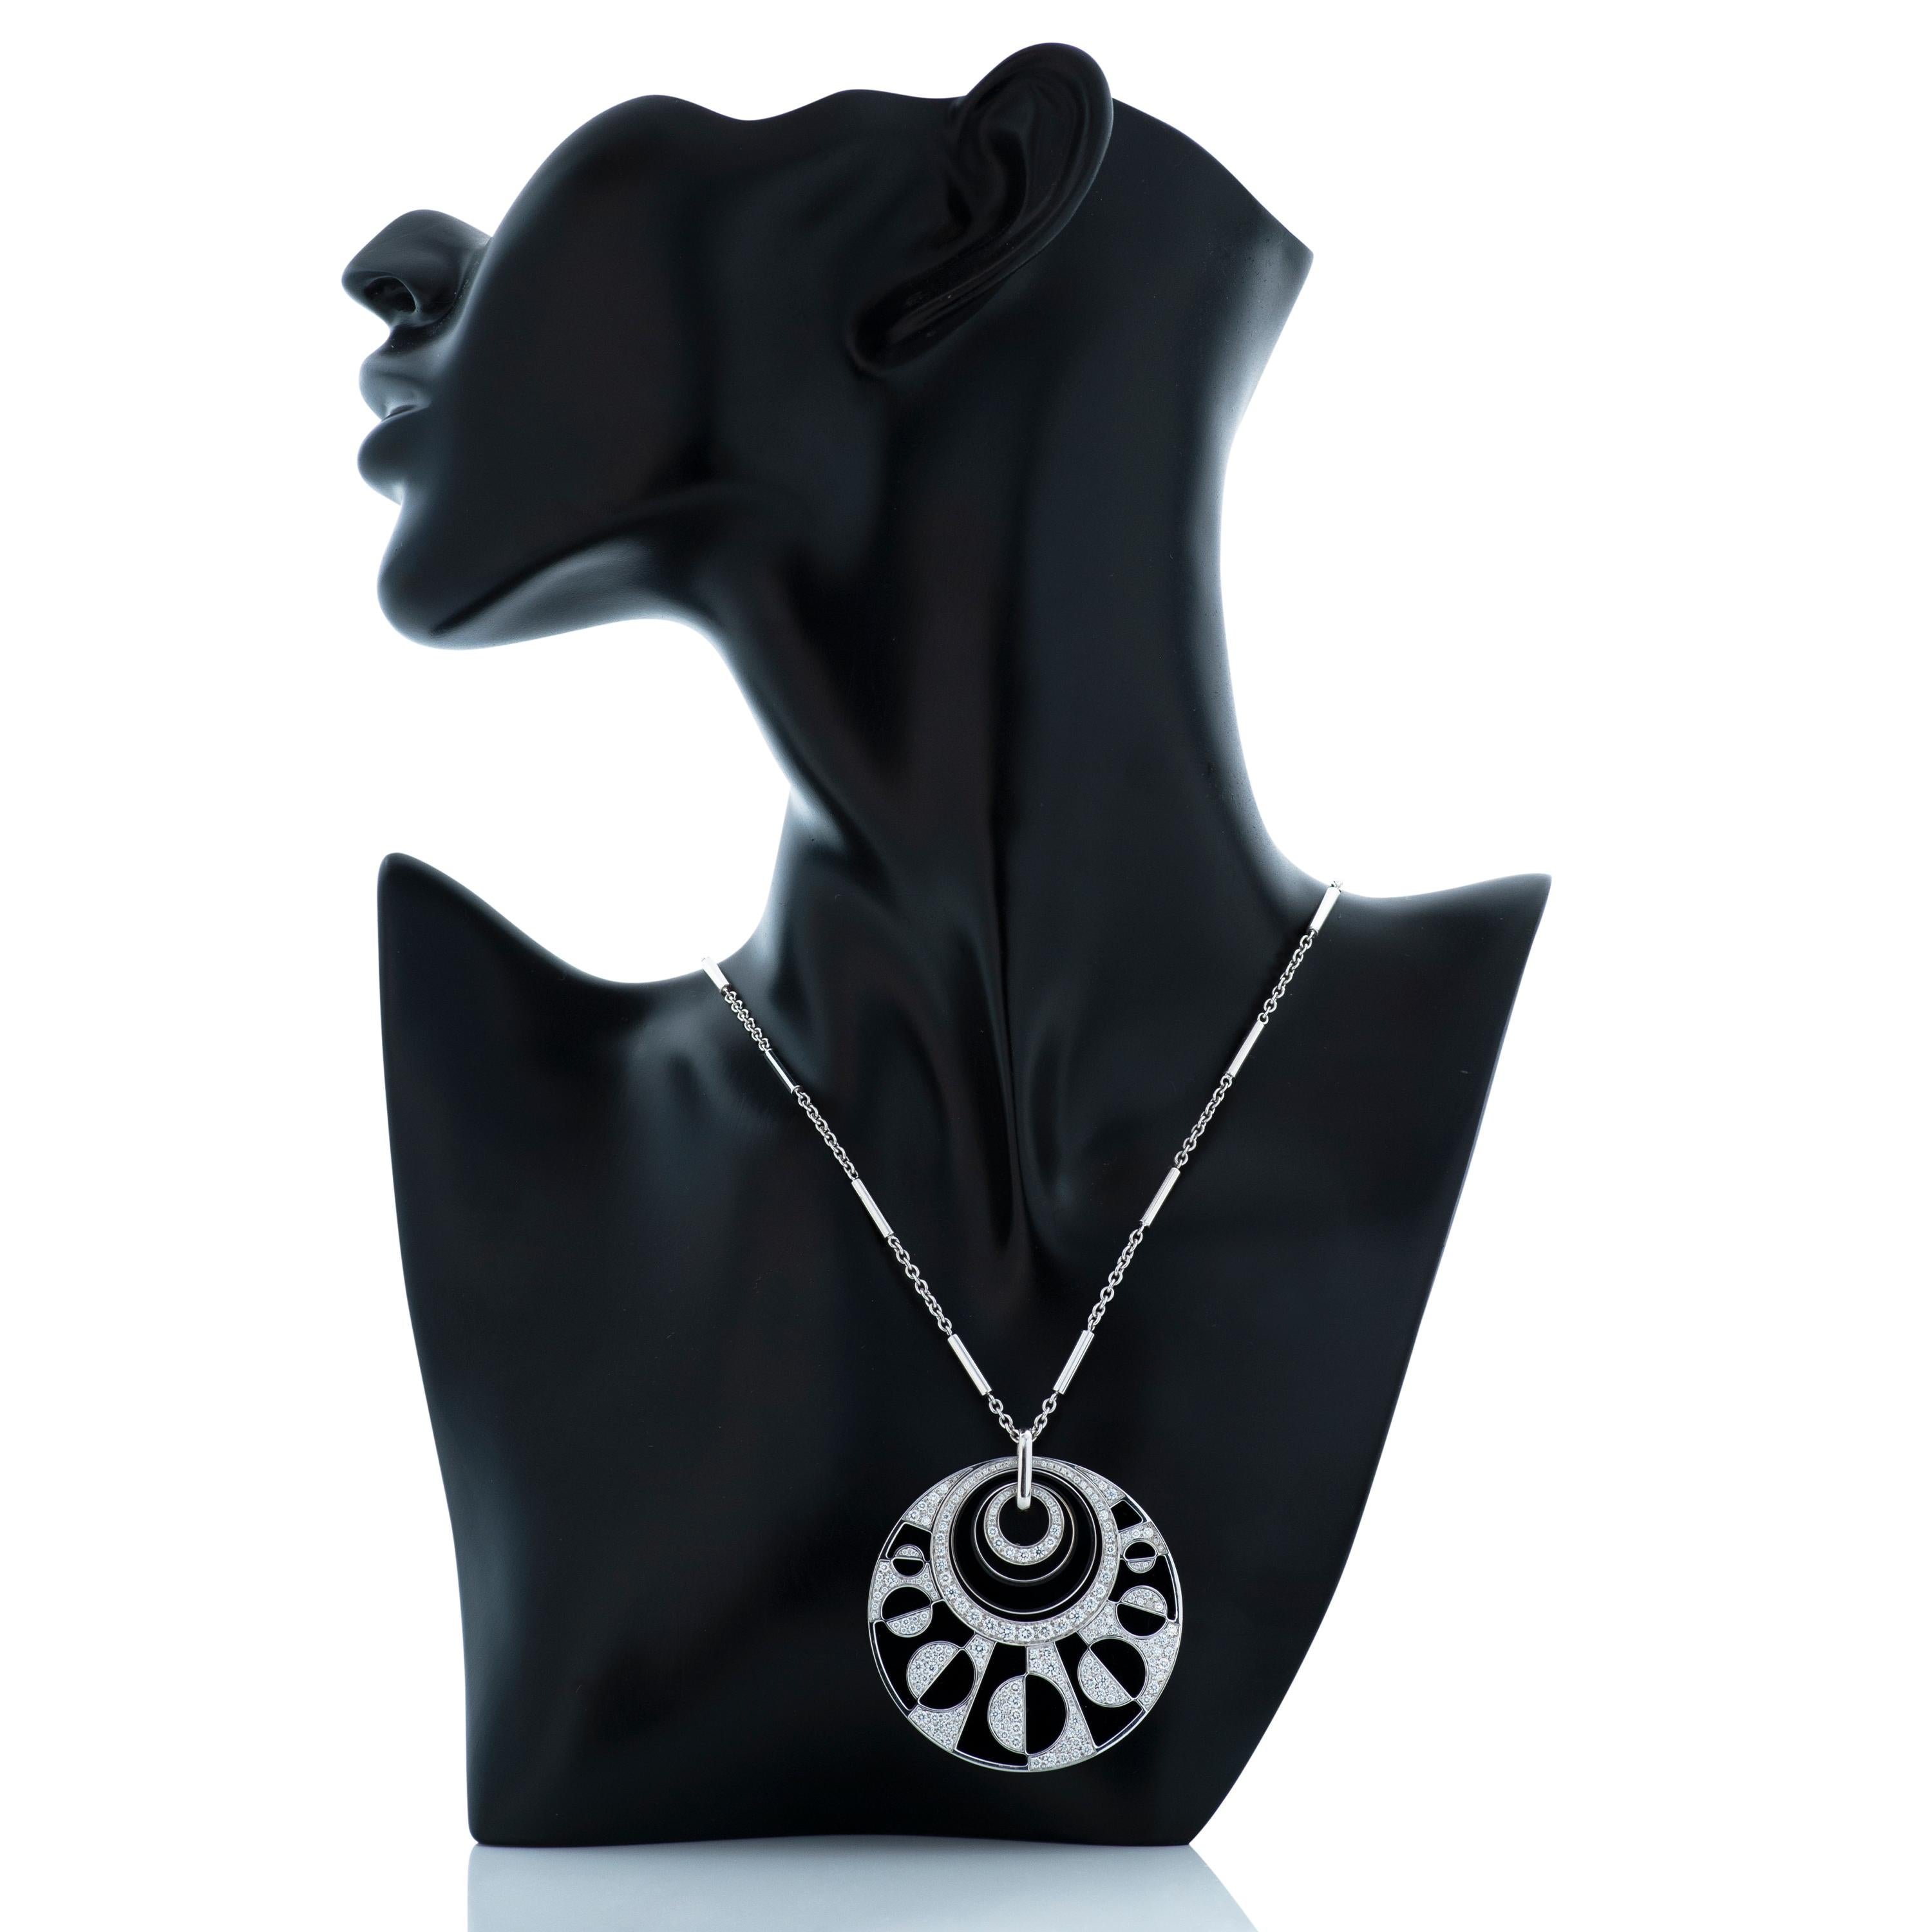 Bulgari 18kwg diamond and onyx disc pendant with adjustable length necklace chain, from the Intarsio collection.

This pendant includes approximately 2.98 carats of round brilliant cut diamonds, contrasted by geometric shaped pieces of black onyx. 